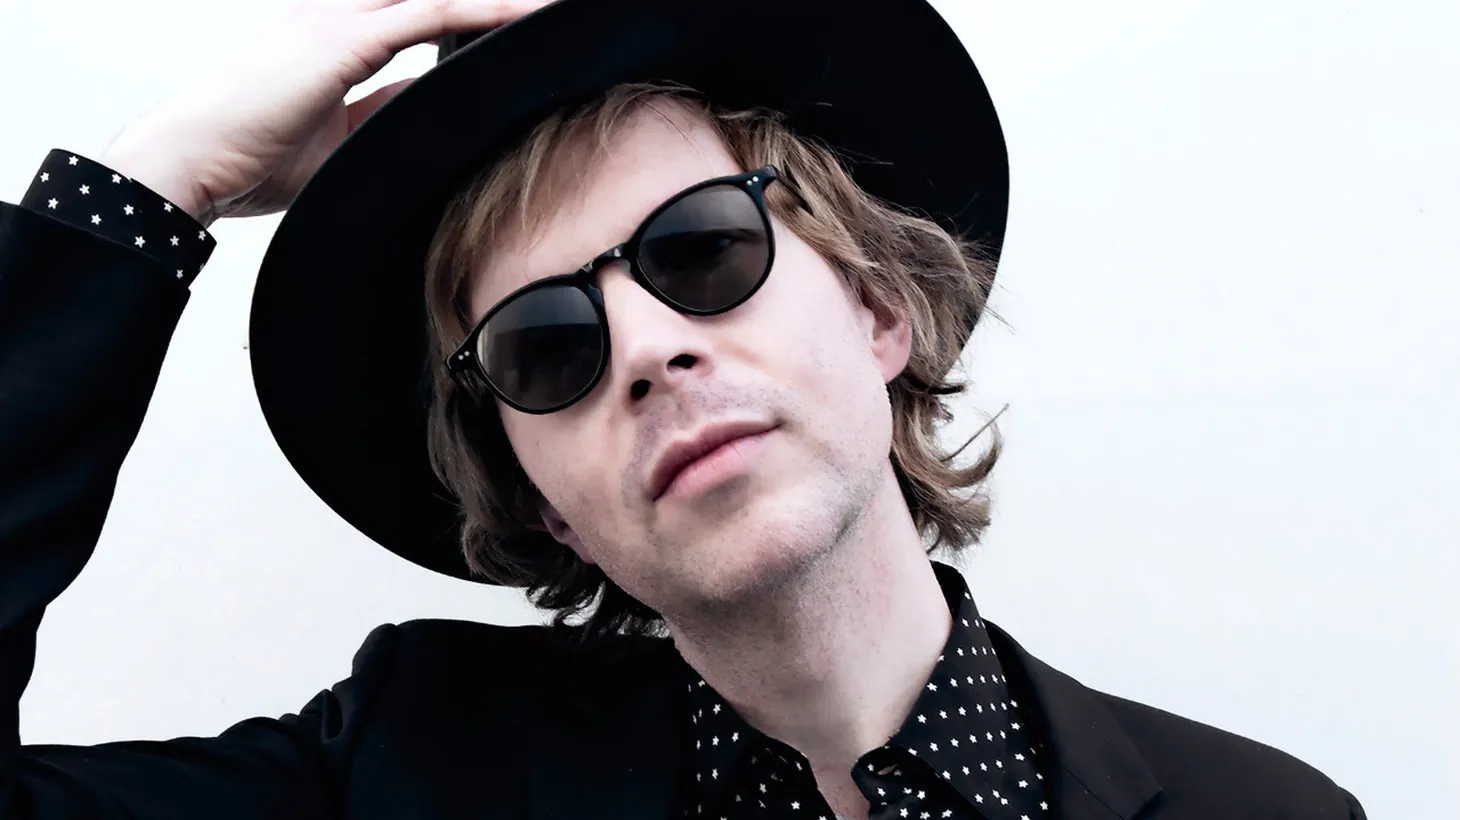 Beck has always been a chameleon and his latest Colors finds him returning to the incredibly upbeat songs that drove earlier albums like Odelay and Guero. (10am)